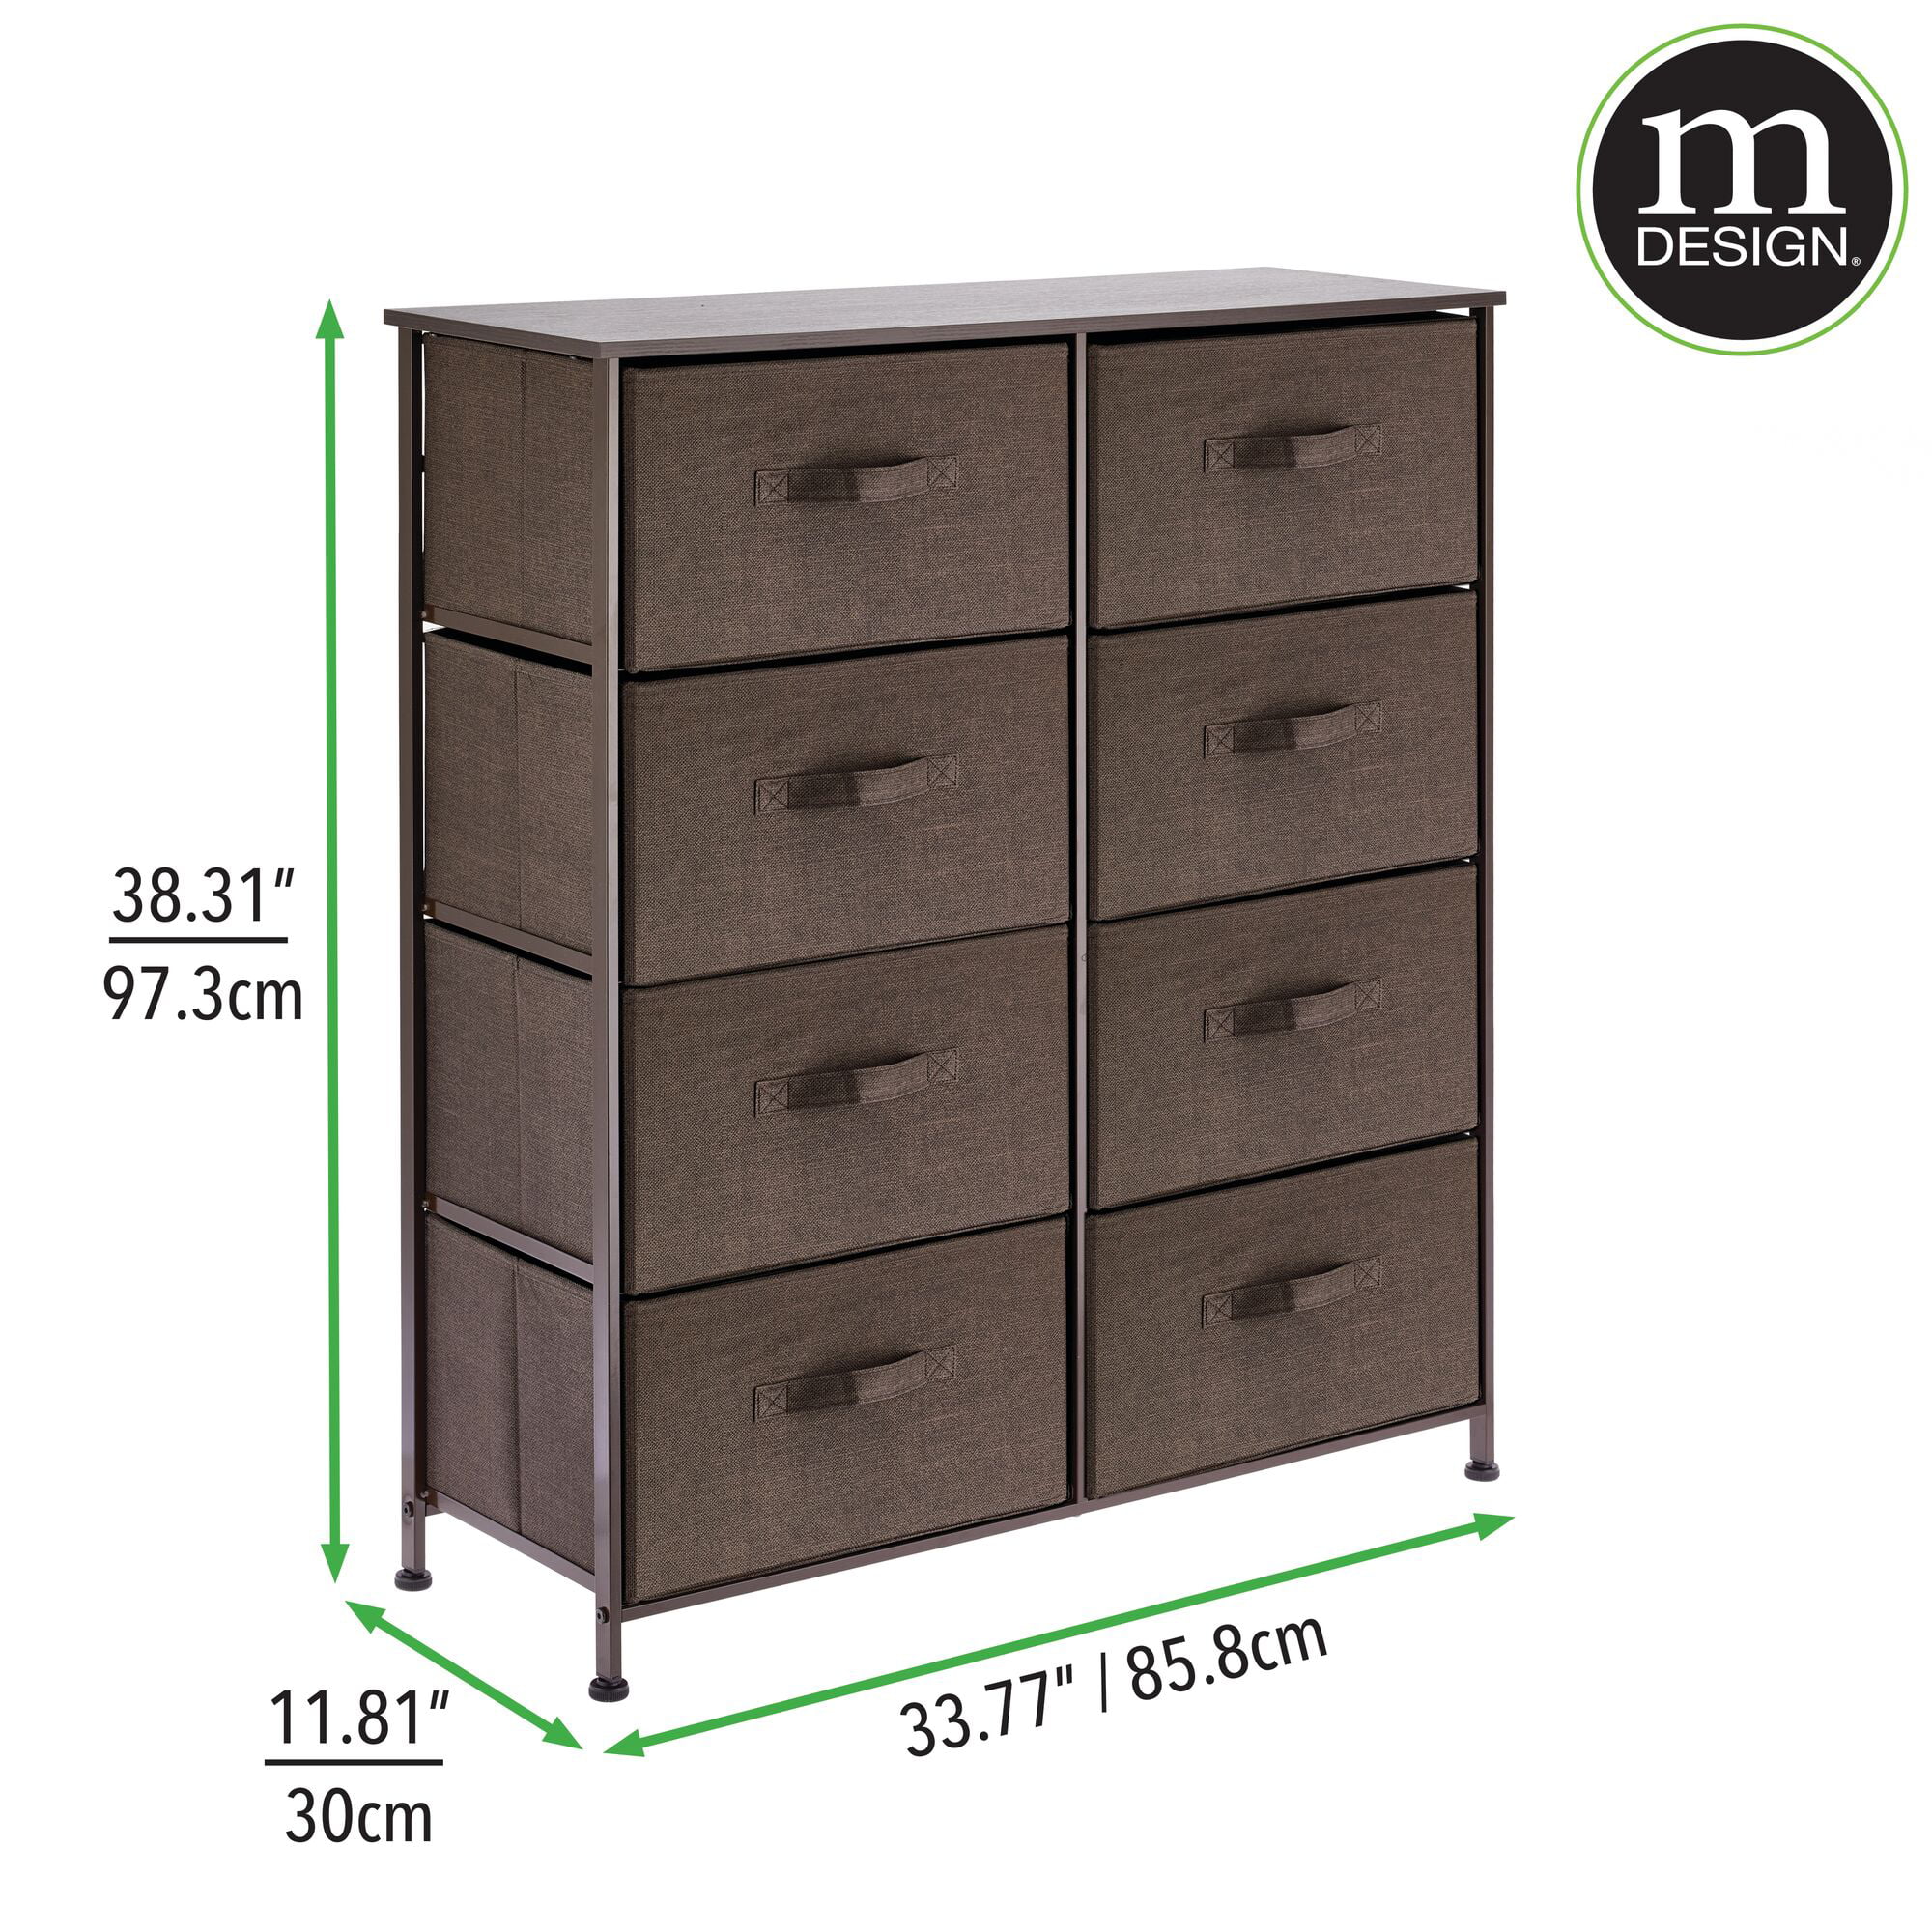 Tall Standing Organizer Tower for Bedroom Espresso Brown Office and Closet mDesign Storage Dresser Furniture Unit Living Room 5 Drawer Removable Fabric Bins 